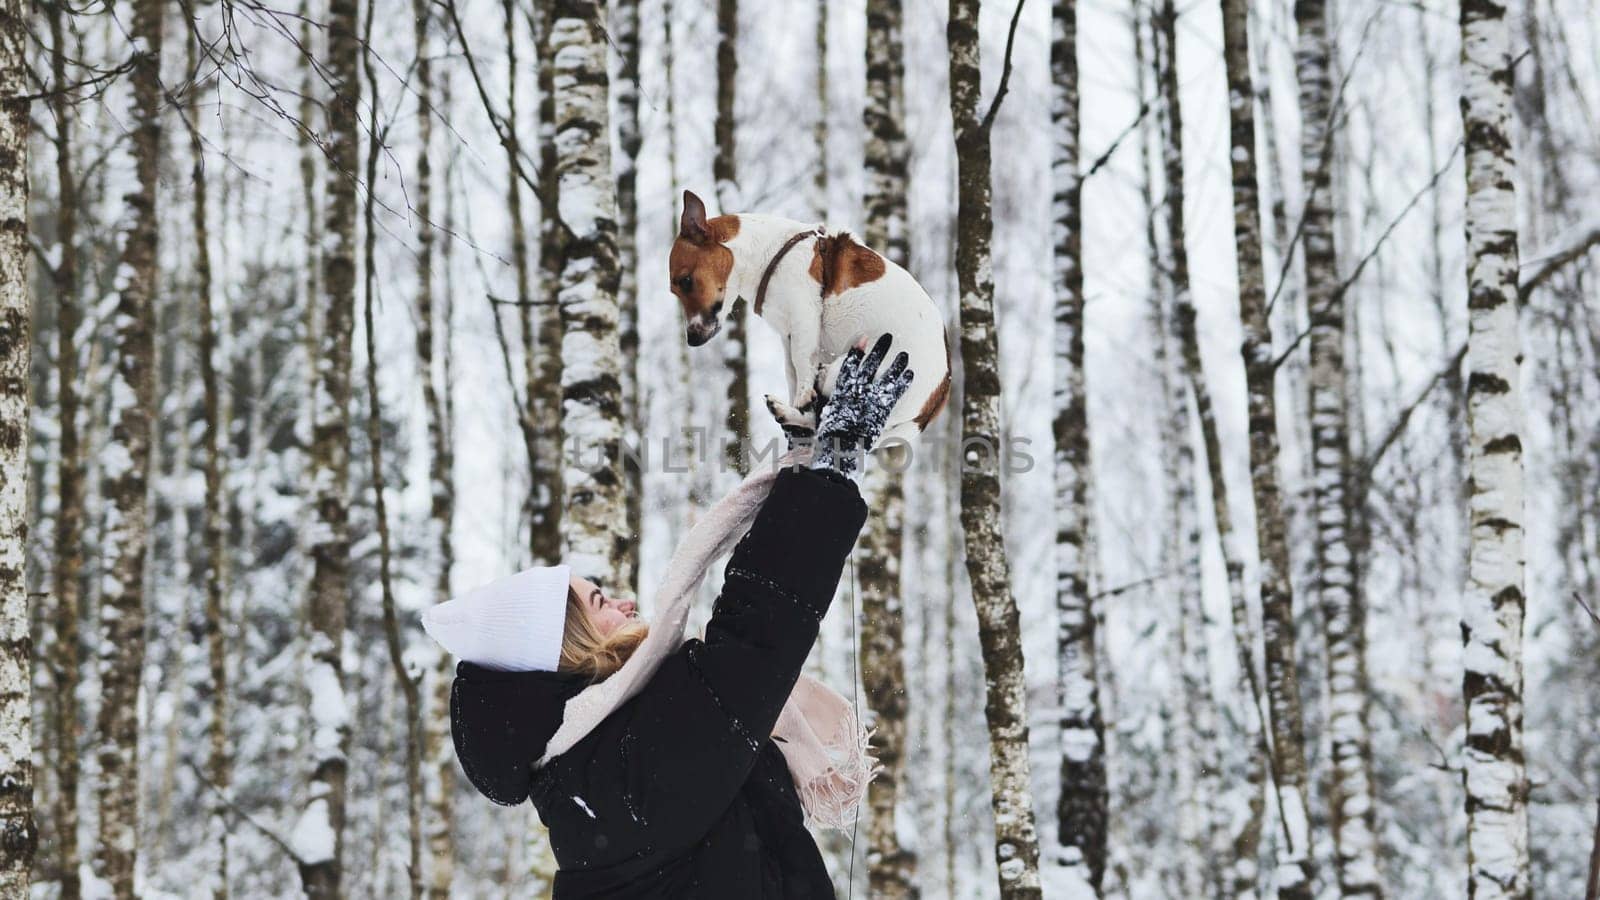 A girl tosses up her Jack Russell Terrier dog in the woods in winter. by DovidPro